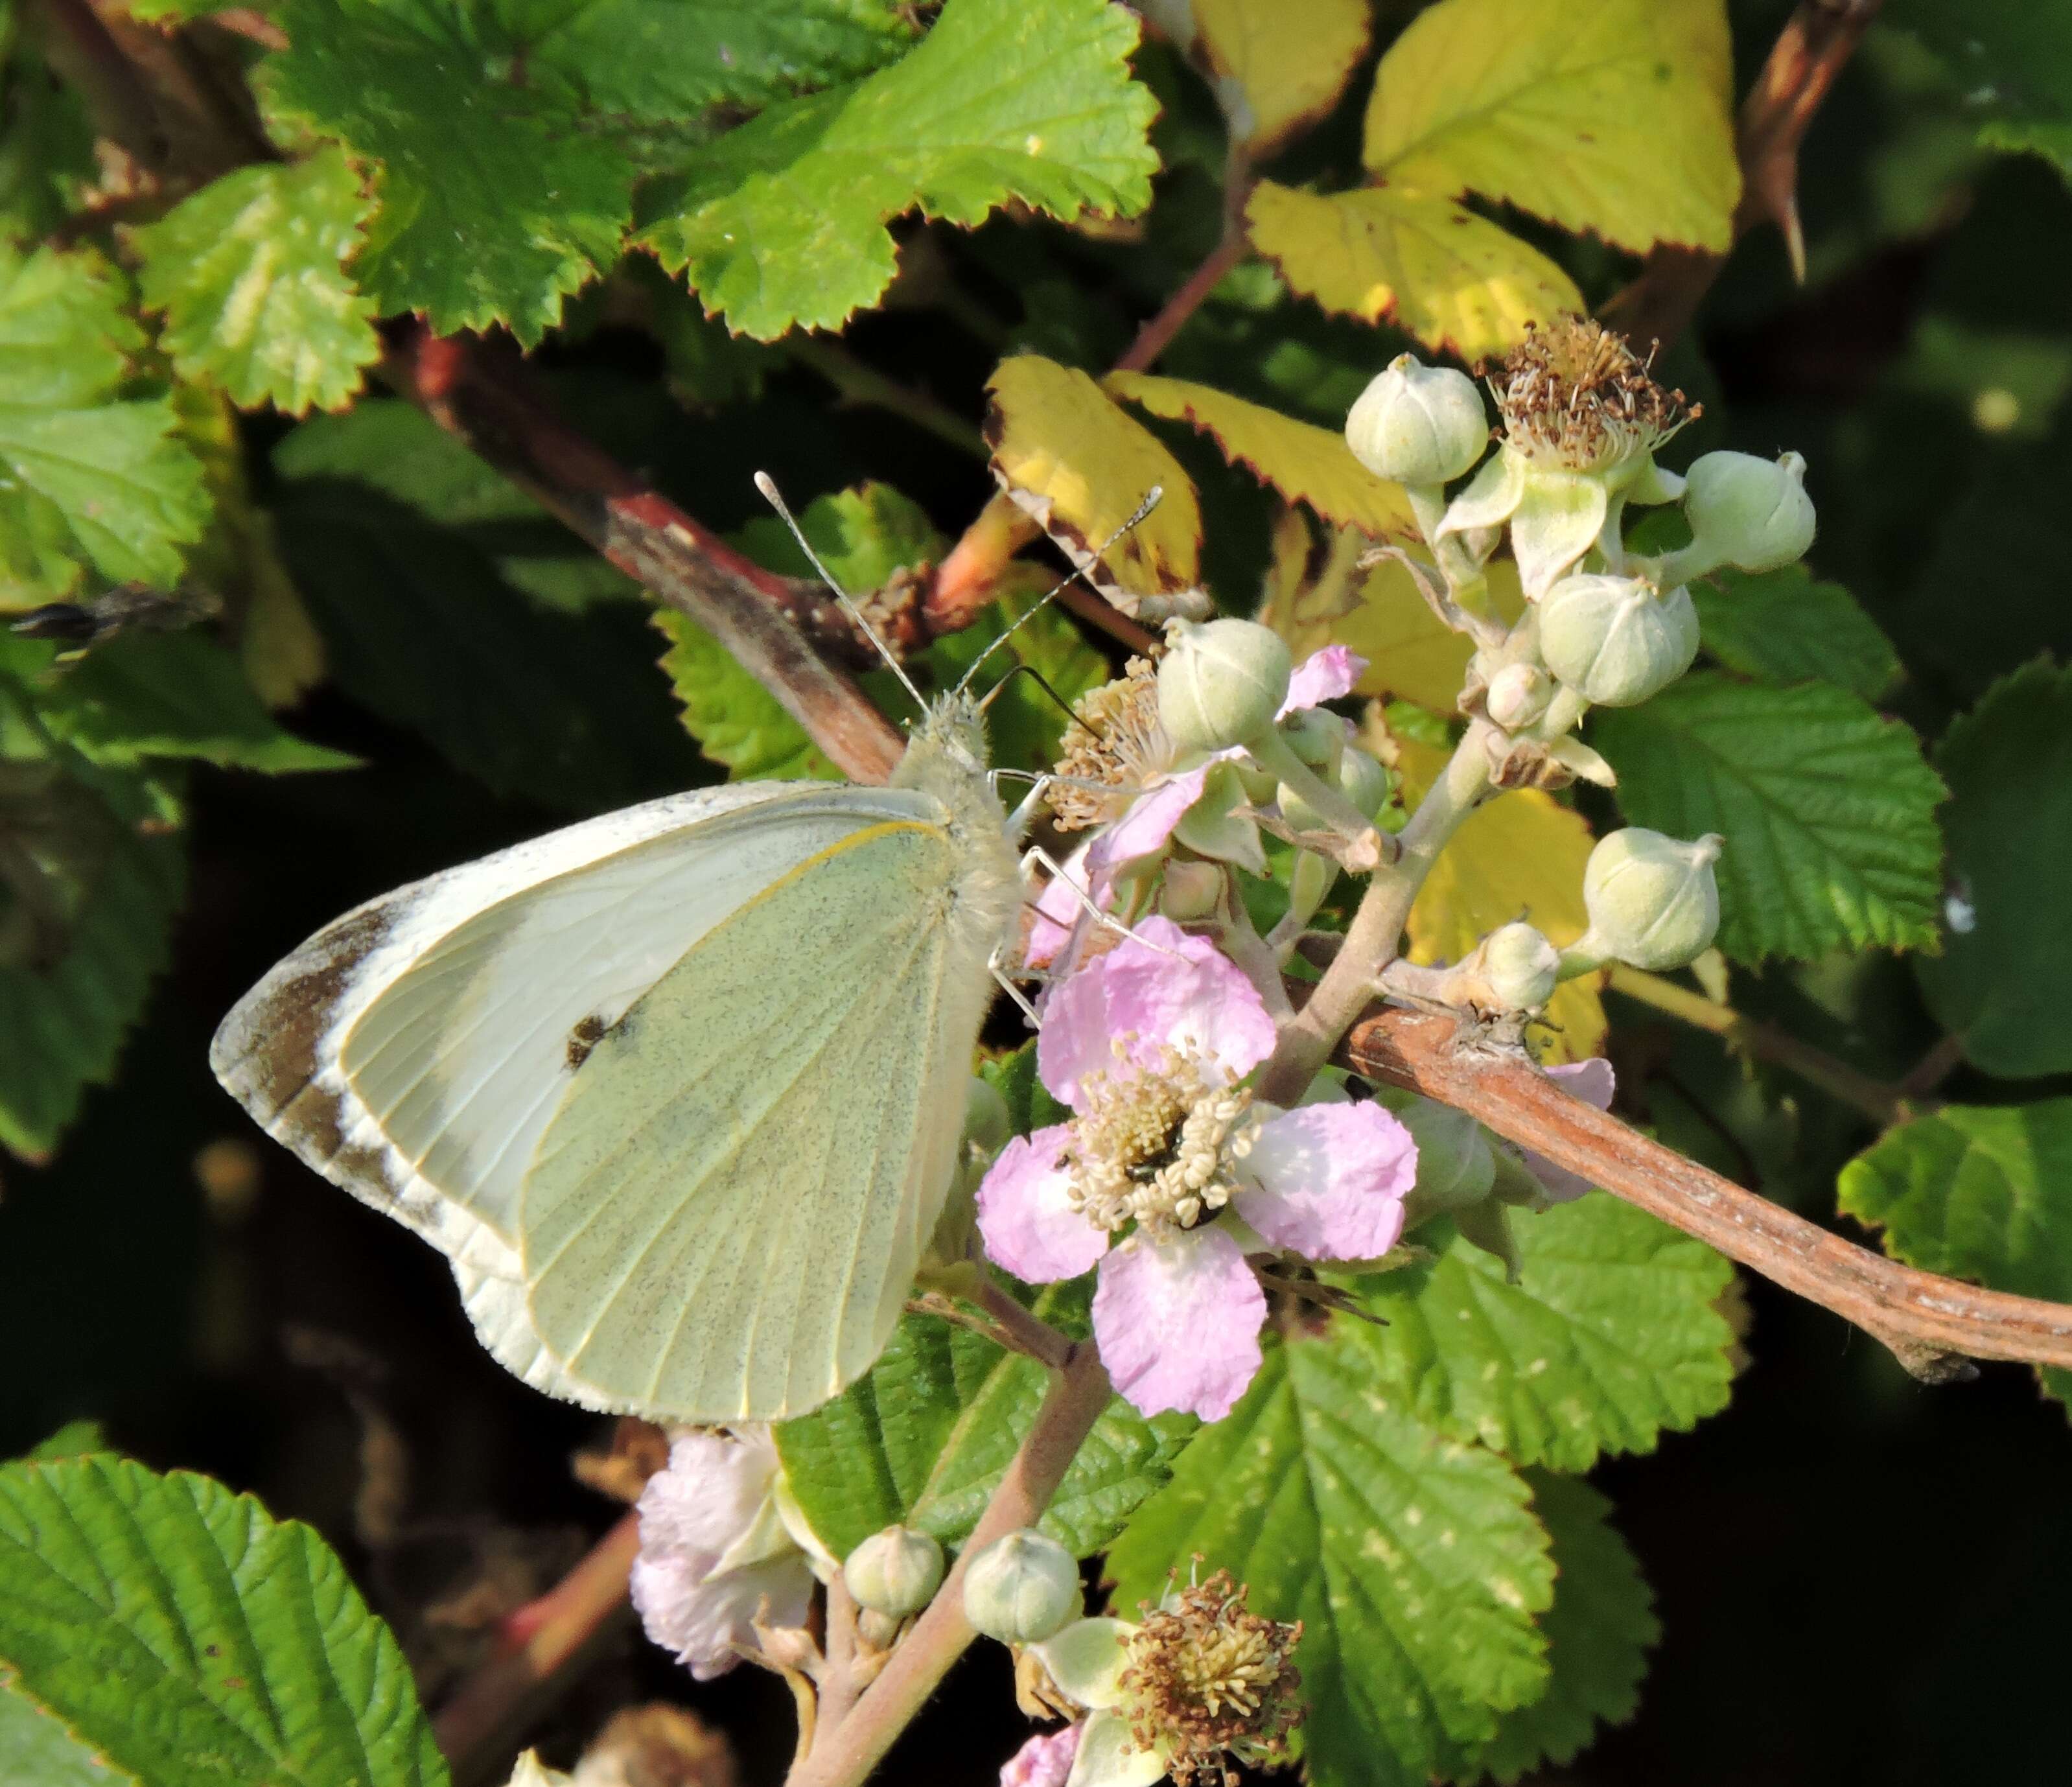 Large White taking its turn on the bramble blossom.